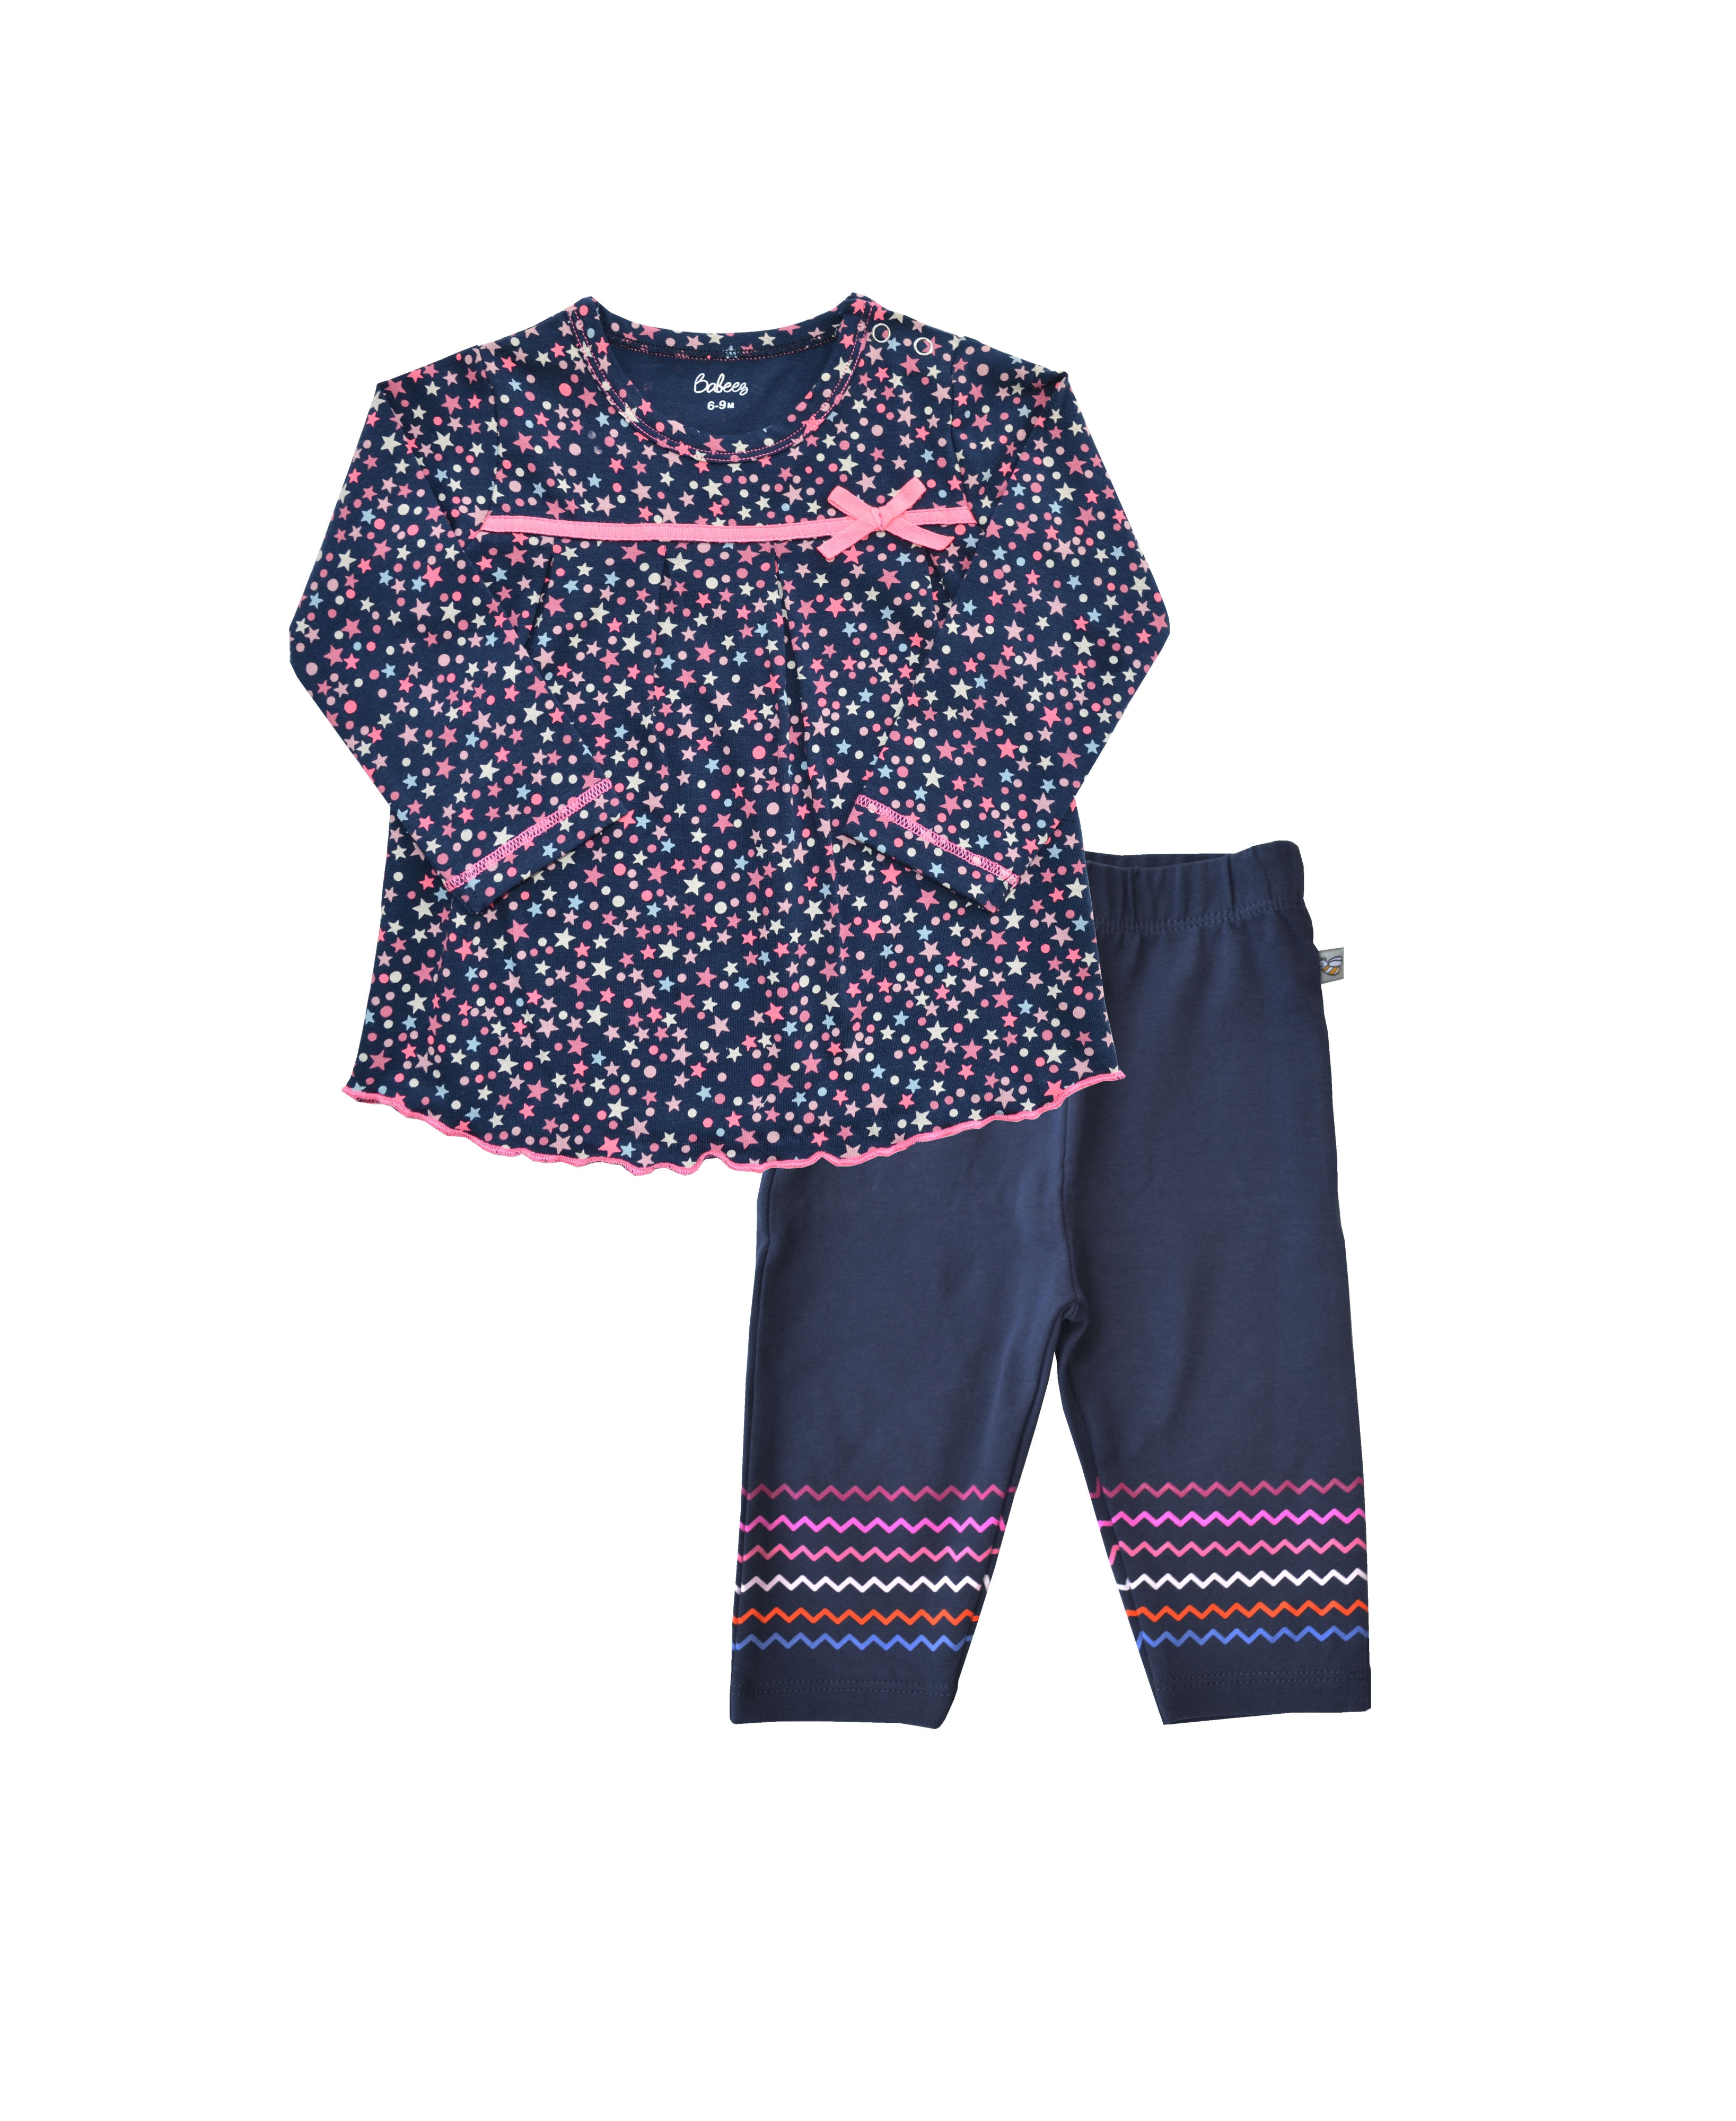 Allover Star Print on Navy Long Sleeves Top and Navy Legging with Wave Print at Bottom (95%Cotton 5%Elasthan Jersey)